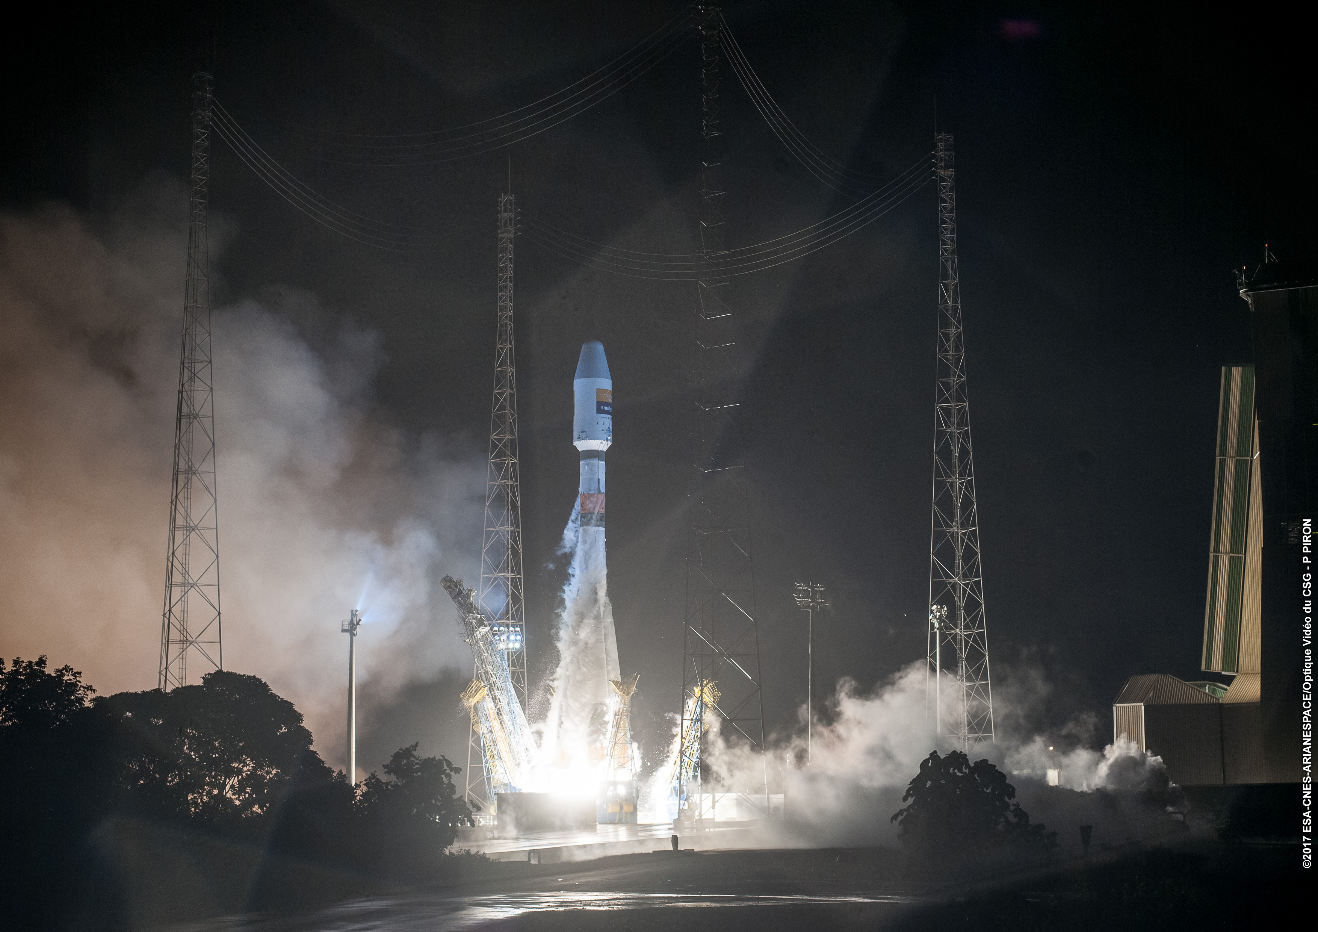 Arianespace starts 2017 with Soyuz launch success